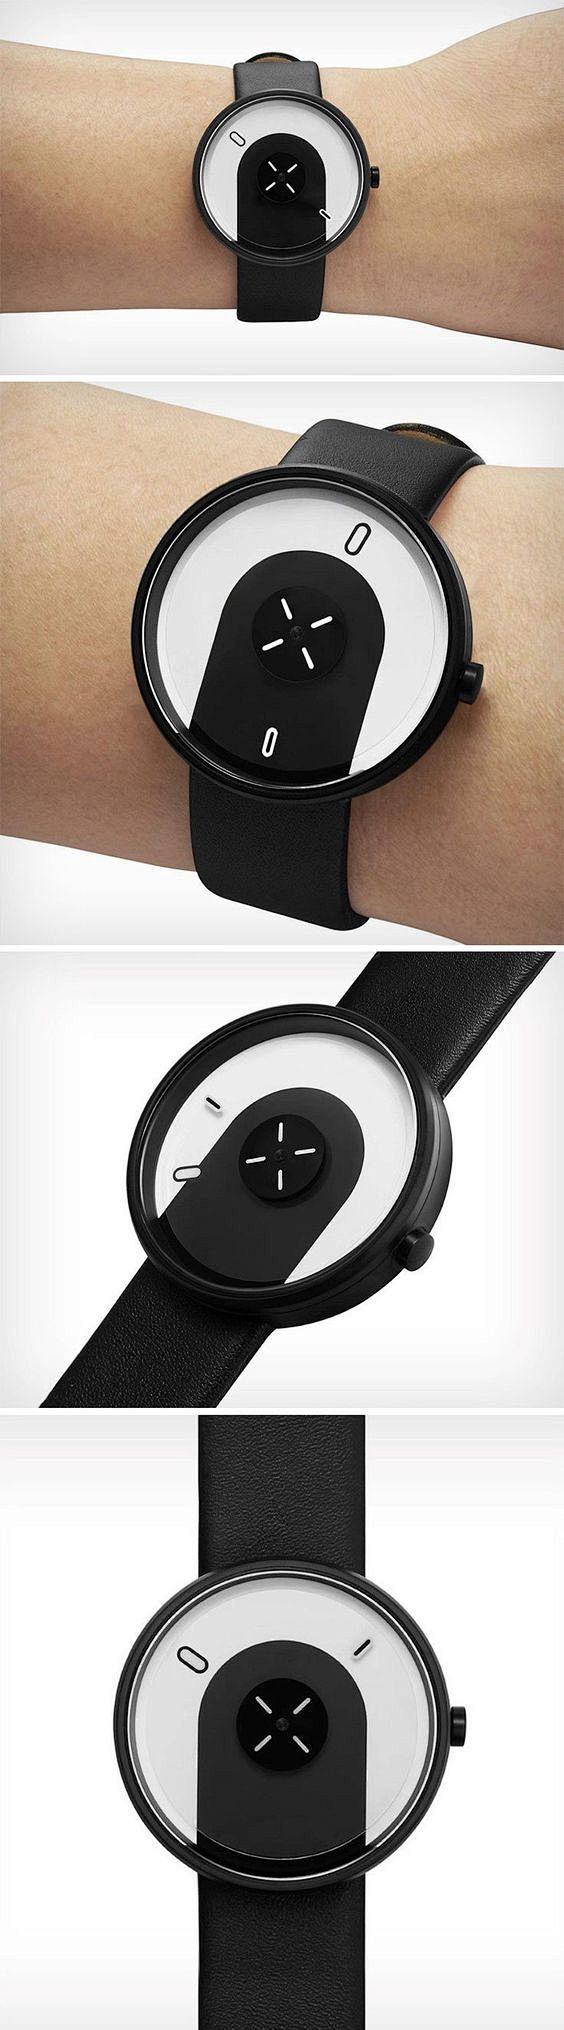 With a watch-face th...